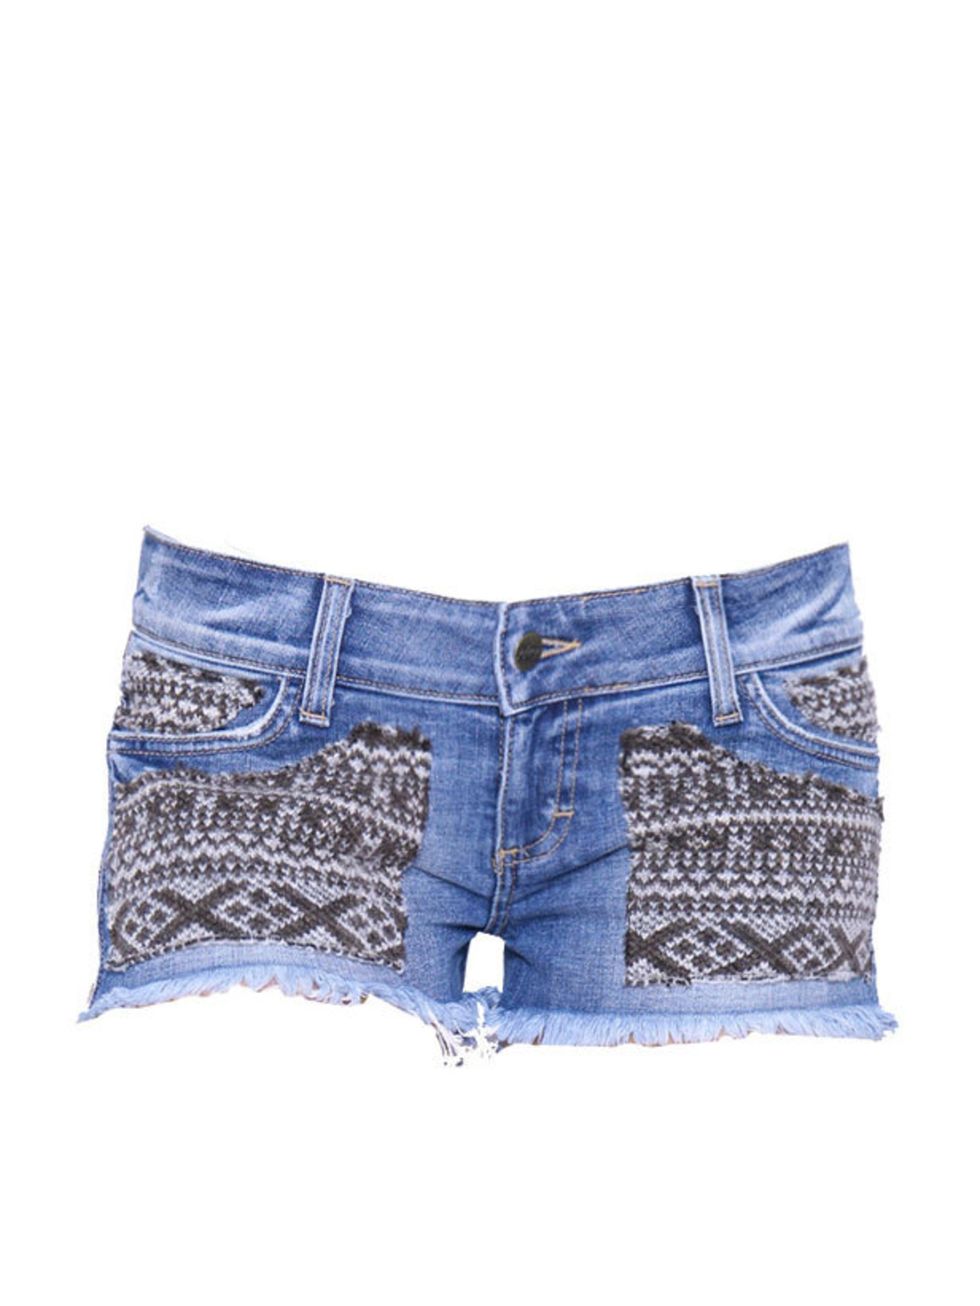 <p>Winter stock is quickly filling the rails but thanks to Siwy, your Bestival wardrobe is sorted with these Aztec infused cut-offs Siwy denim shorts, £175, for stockists call 0207 631 0928</p>